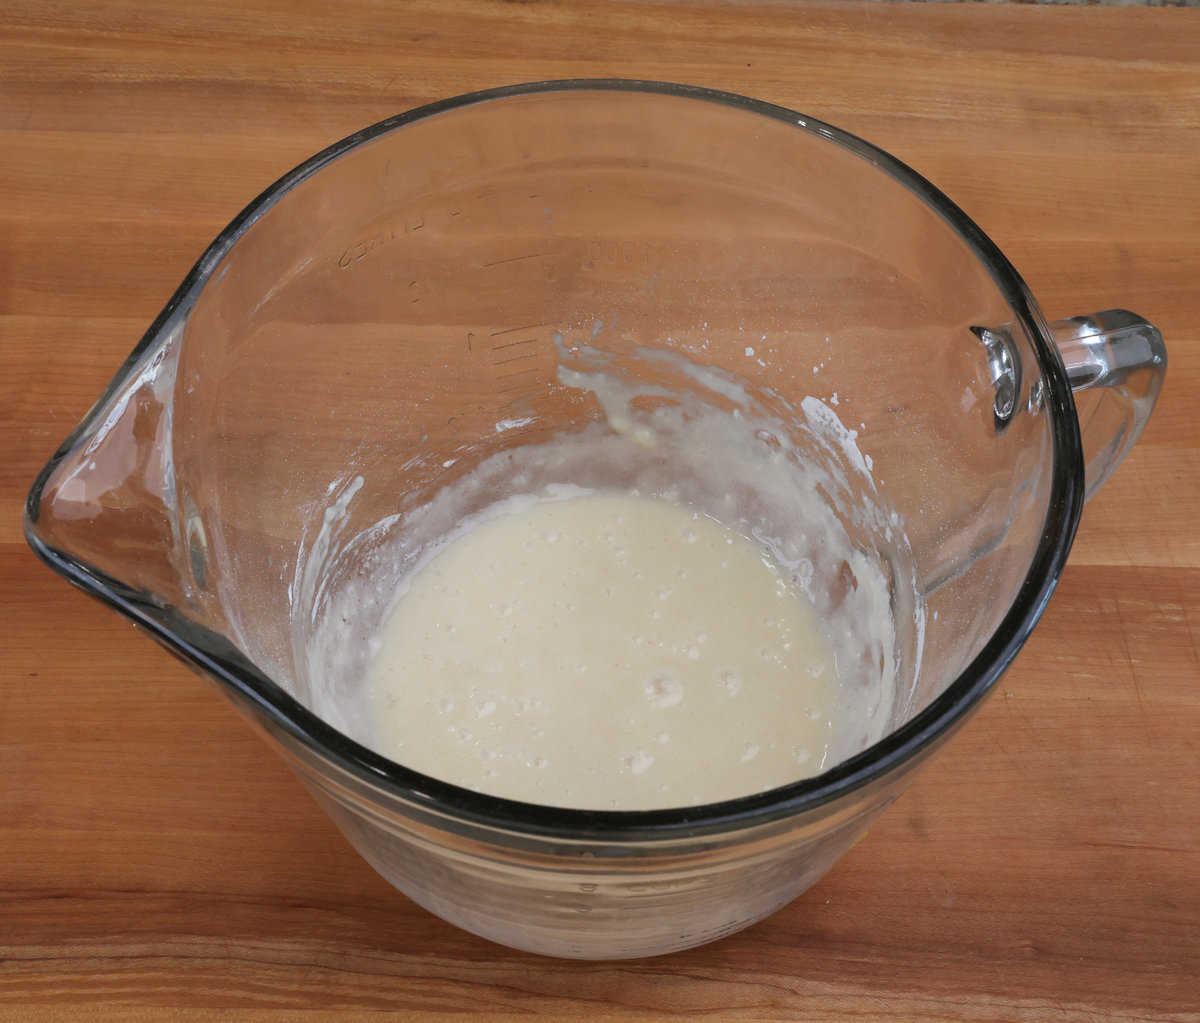 flour, an egg white, vanilla, and melted butter in a mixing bowl